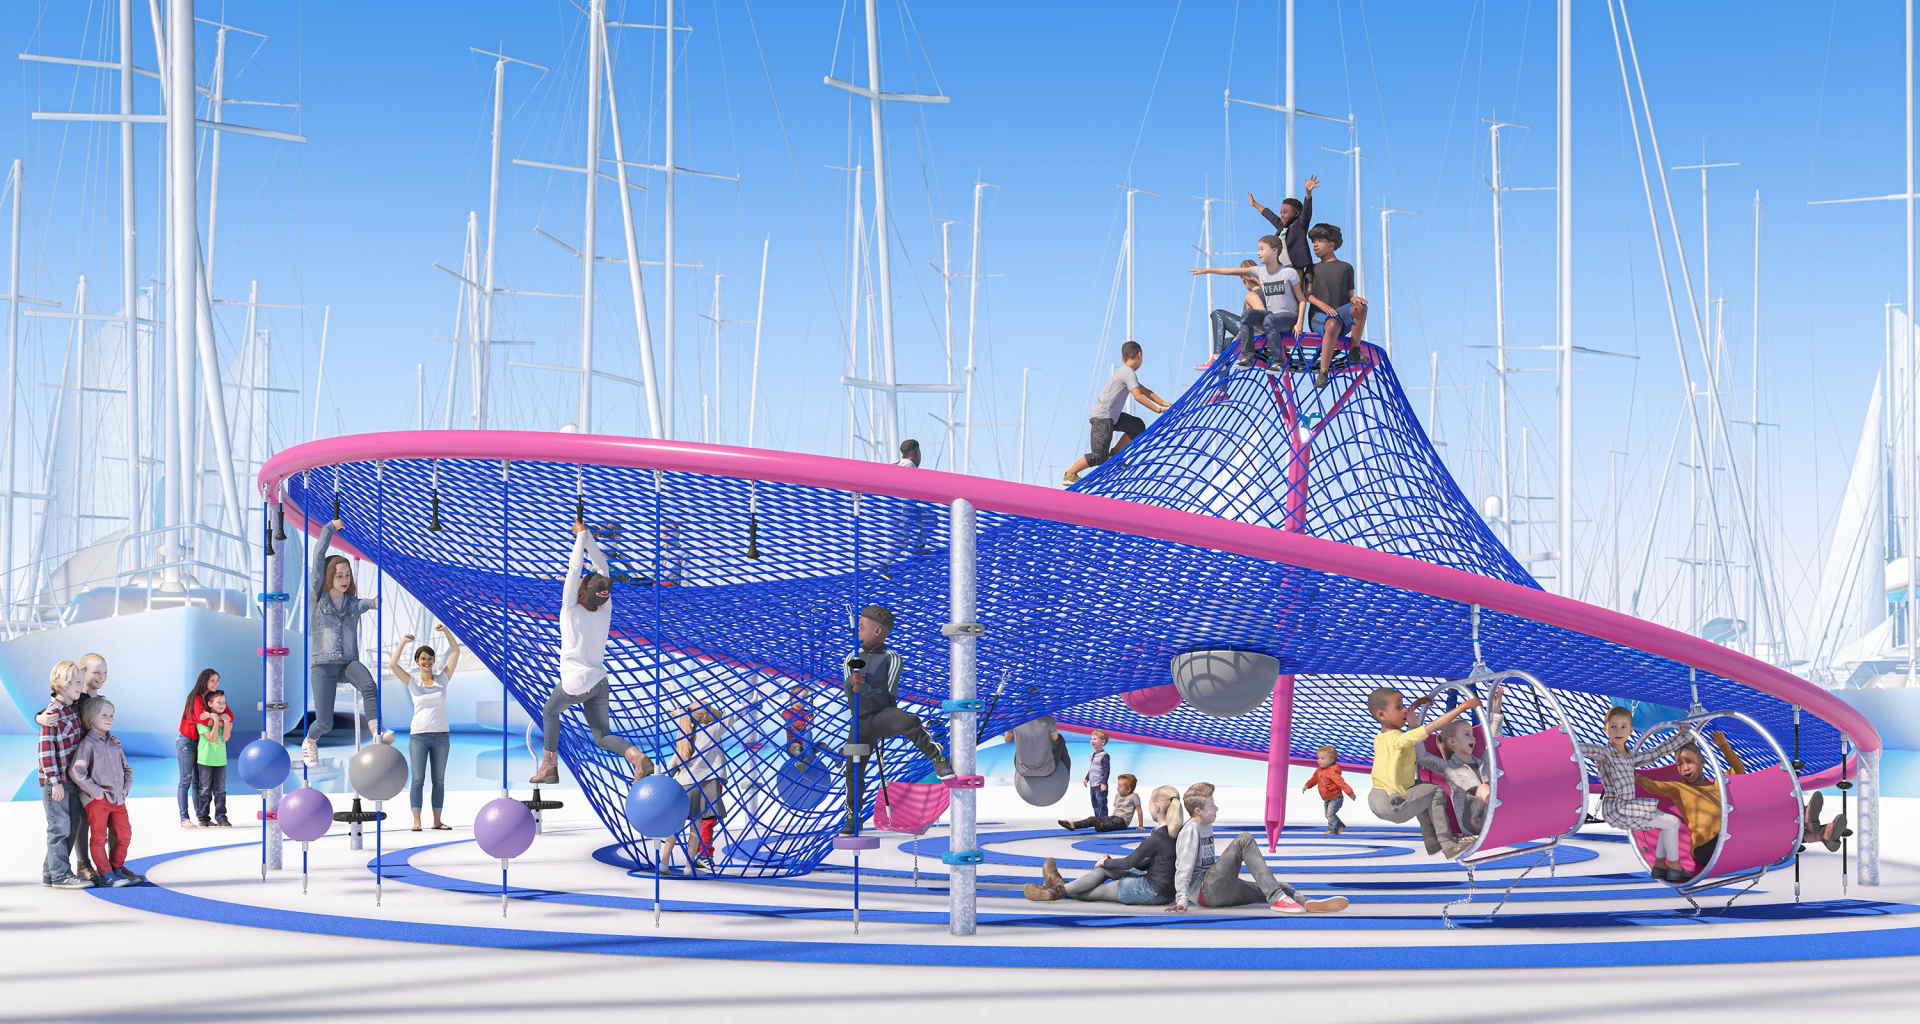 Concept design of children playing, climbing, and swinging from a Corocord rope net structure